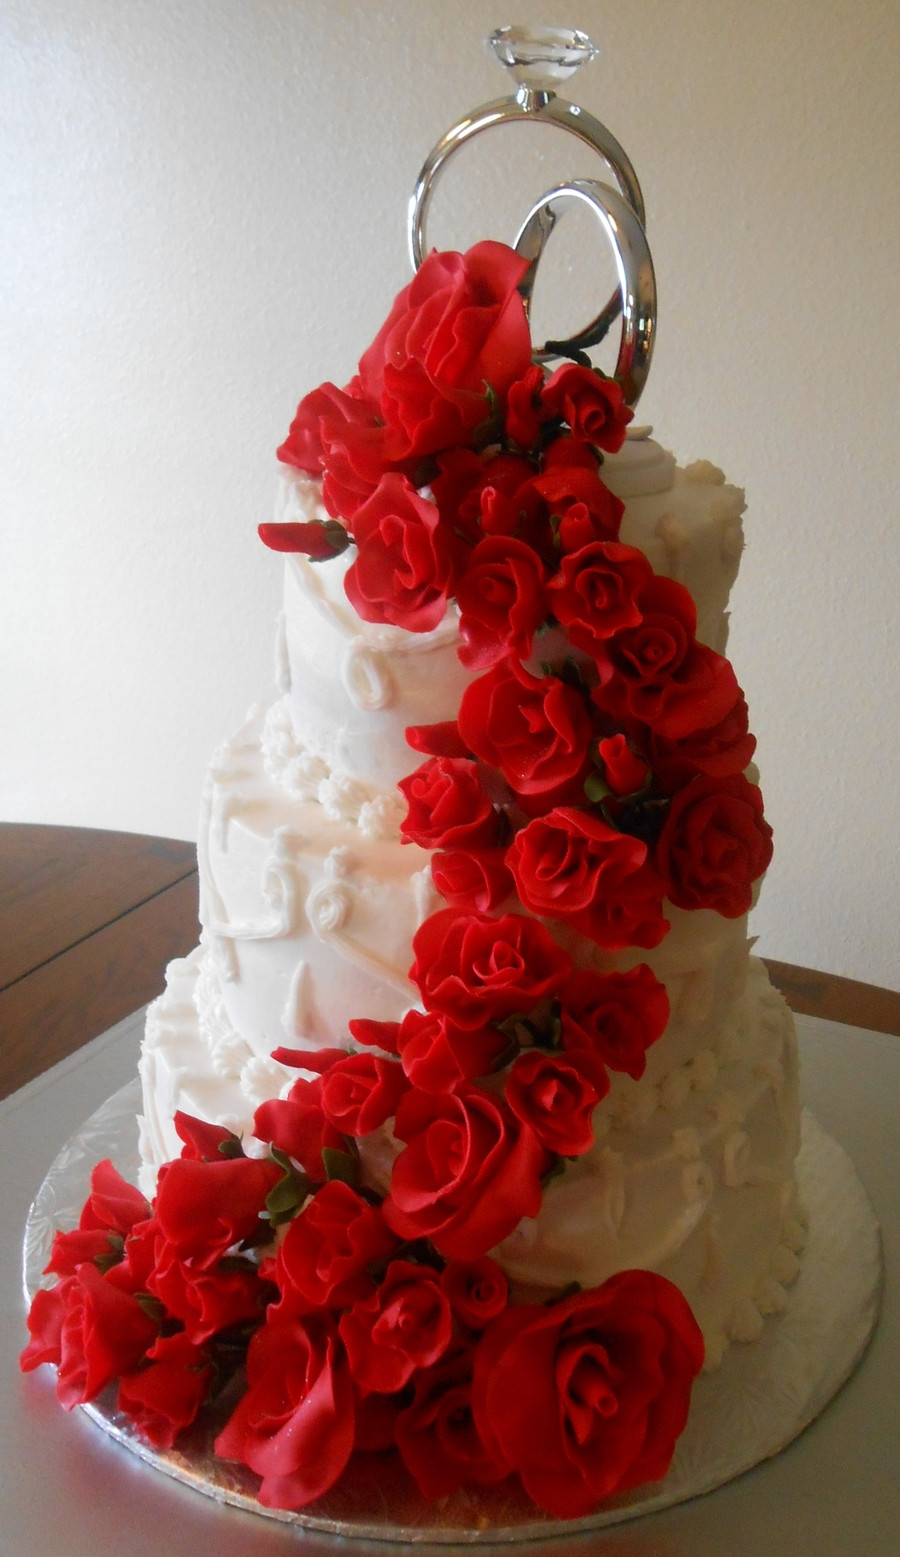 Wedding Cakes With Red Roses
 Red Roses Wedding Cake All Fondantgumpaste Roses Cake Was